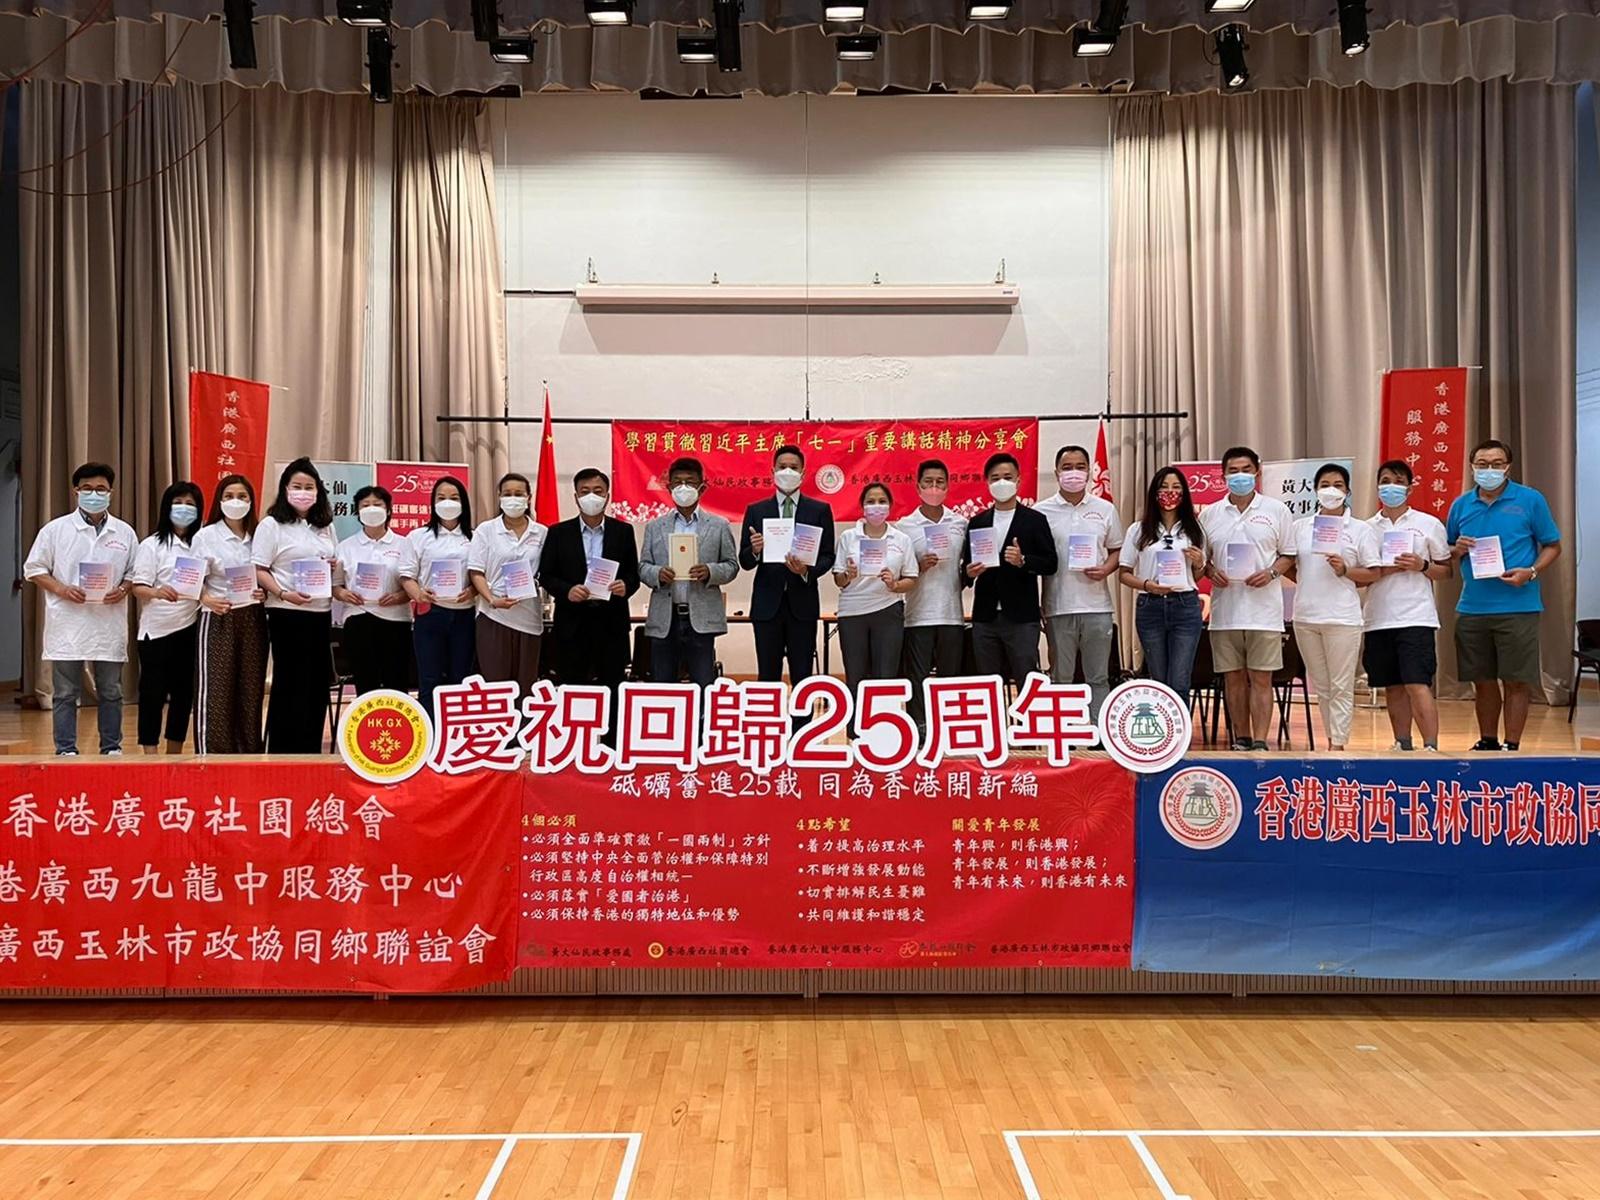 The Wong Tai Sin District Office and Hong Kong GuangXi Yulin City Chinese People's Political Consultative Conference Association jointly held the "Session to Learn about and Implement the Spirit of President Xi's Important Speech" at Fung Tak Estate Community Centre yesterday (July 12). Photo shows the Chairman of the Wong Tai Sin North Area Committee, Mr Chan Ying (eighth left); the Director of the Hong Kong GuangXi Kowloon Central District Service Centre, Mr Volais Ng (ninth left); the Vice-Chairman of the Wong Tai Sin Branch of the Democratic Alliance for the Betterment and Progress of Hong Kong, Mr Benny Poon (seventh right); the Vice-President cum Secretary-General of the Hong Kong GuangXi Yulin City CPPCC Association, Ms Eva Yu (ninth right); and the District Officer (Wong Tai Sin), Mr Steve Wong (centre), and members of the Hong Kong GuangXi Yulin City CPPCC Association at the session. 